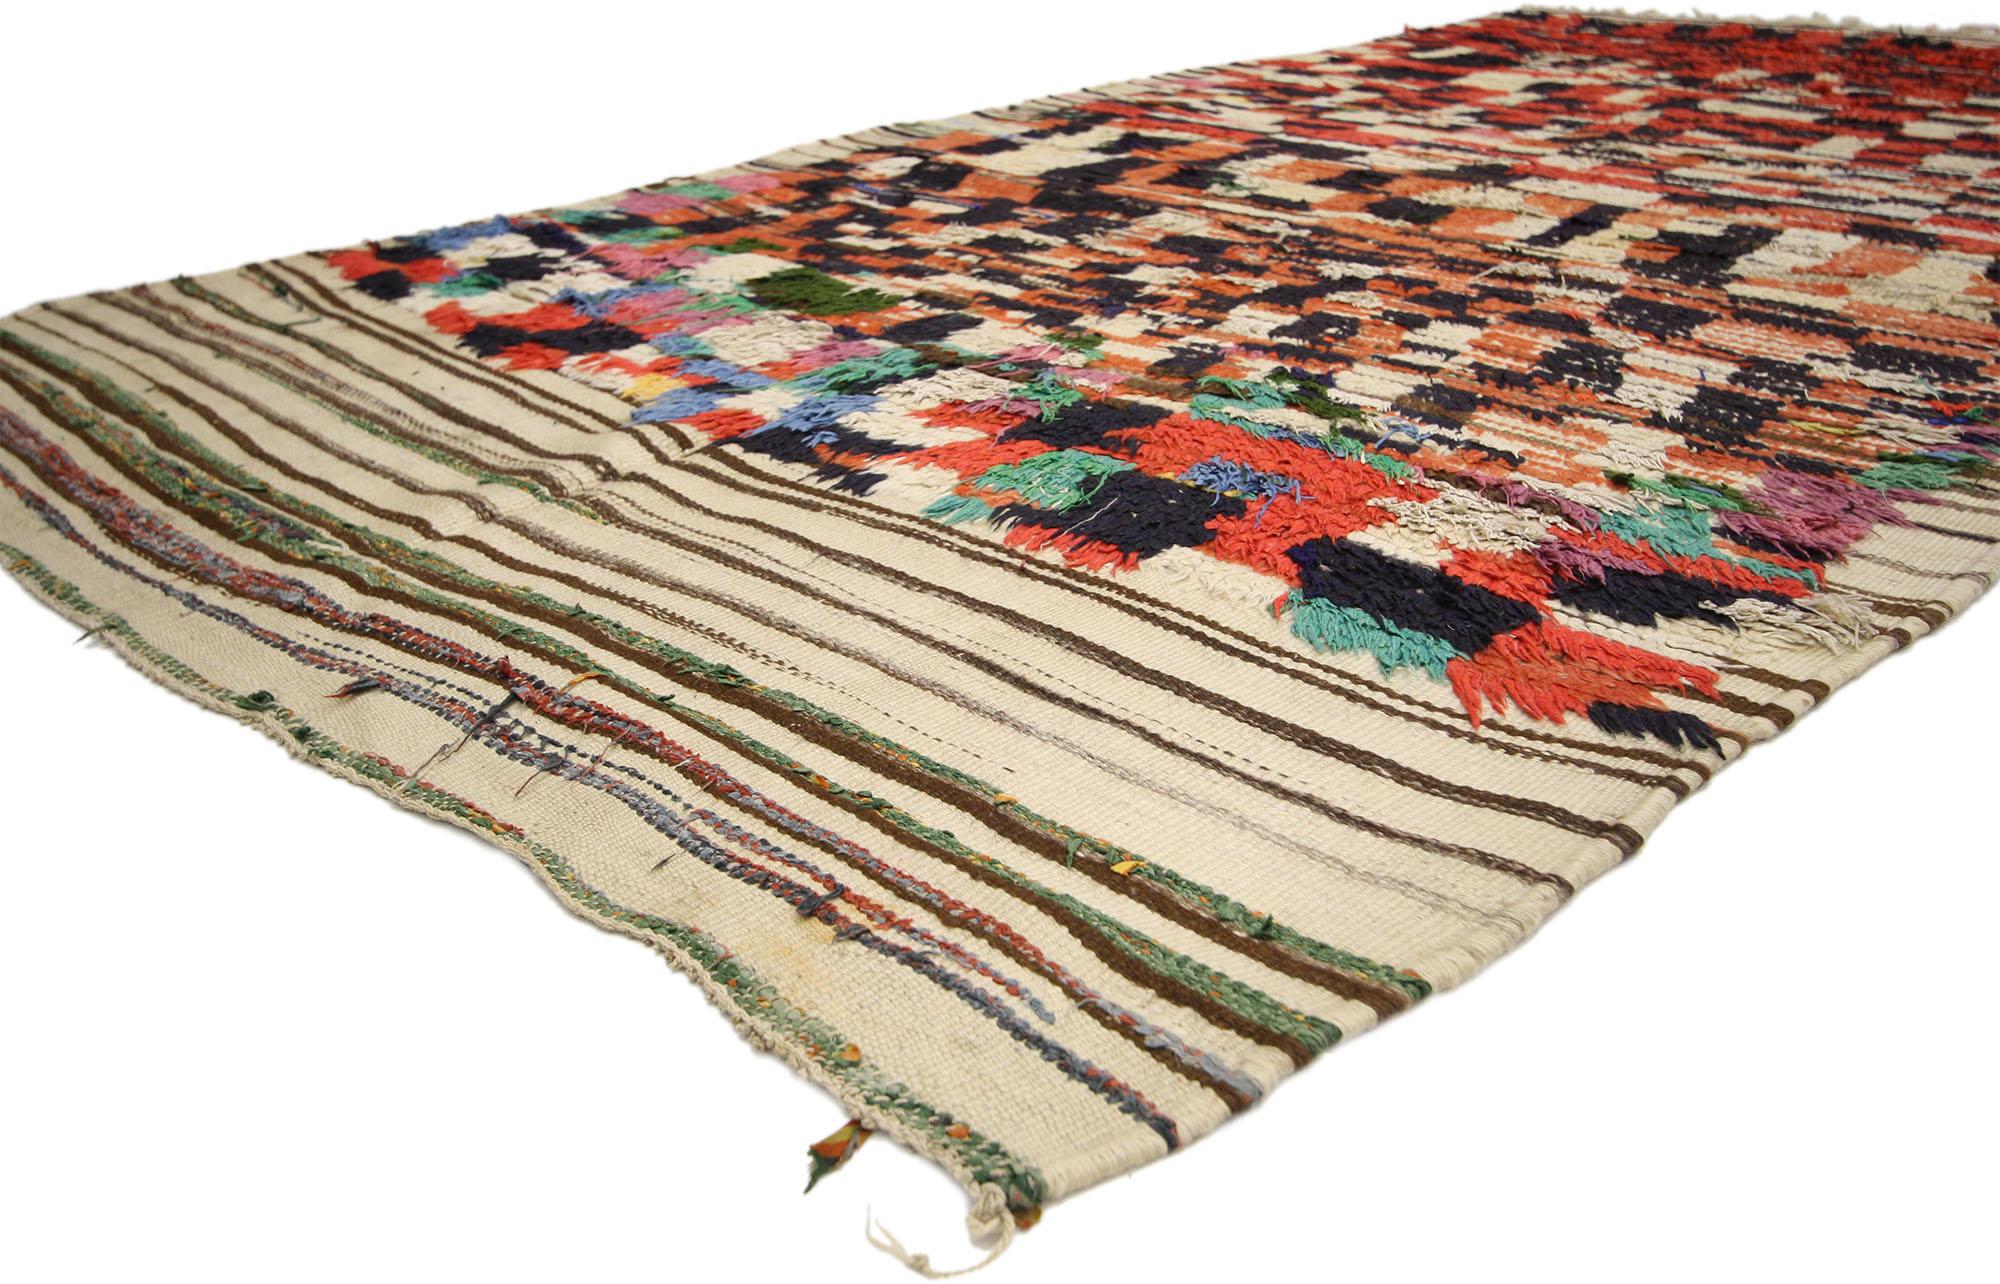  74792 Vintage Berber Moroccan Rehamna rug with tribal style. Abstract square blocks of color combined with the vibrant color palette form a cohesive composition. This vintage Berber Moroccan rug features an all-over geometric pattern of irregular